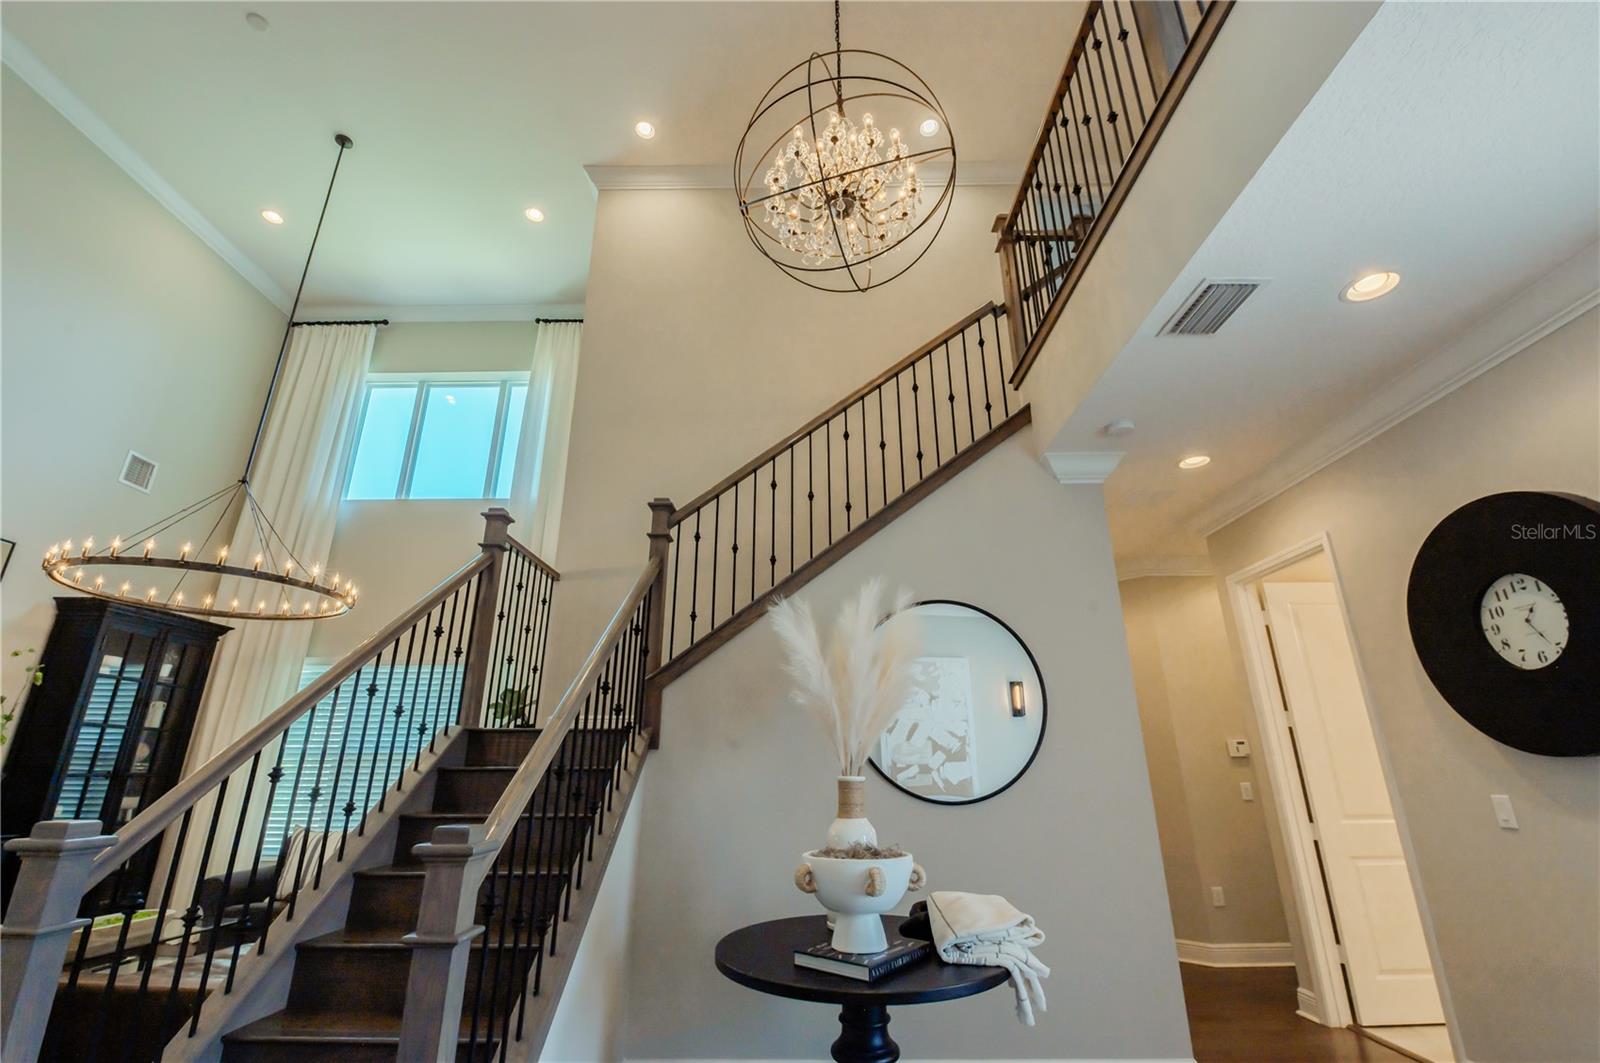 Stunning 2 Story Ceiling Entrance